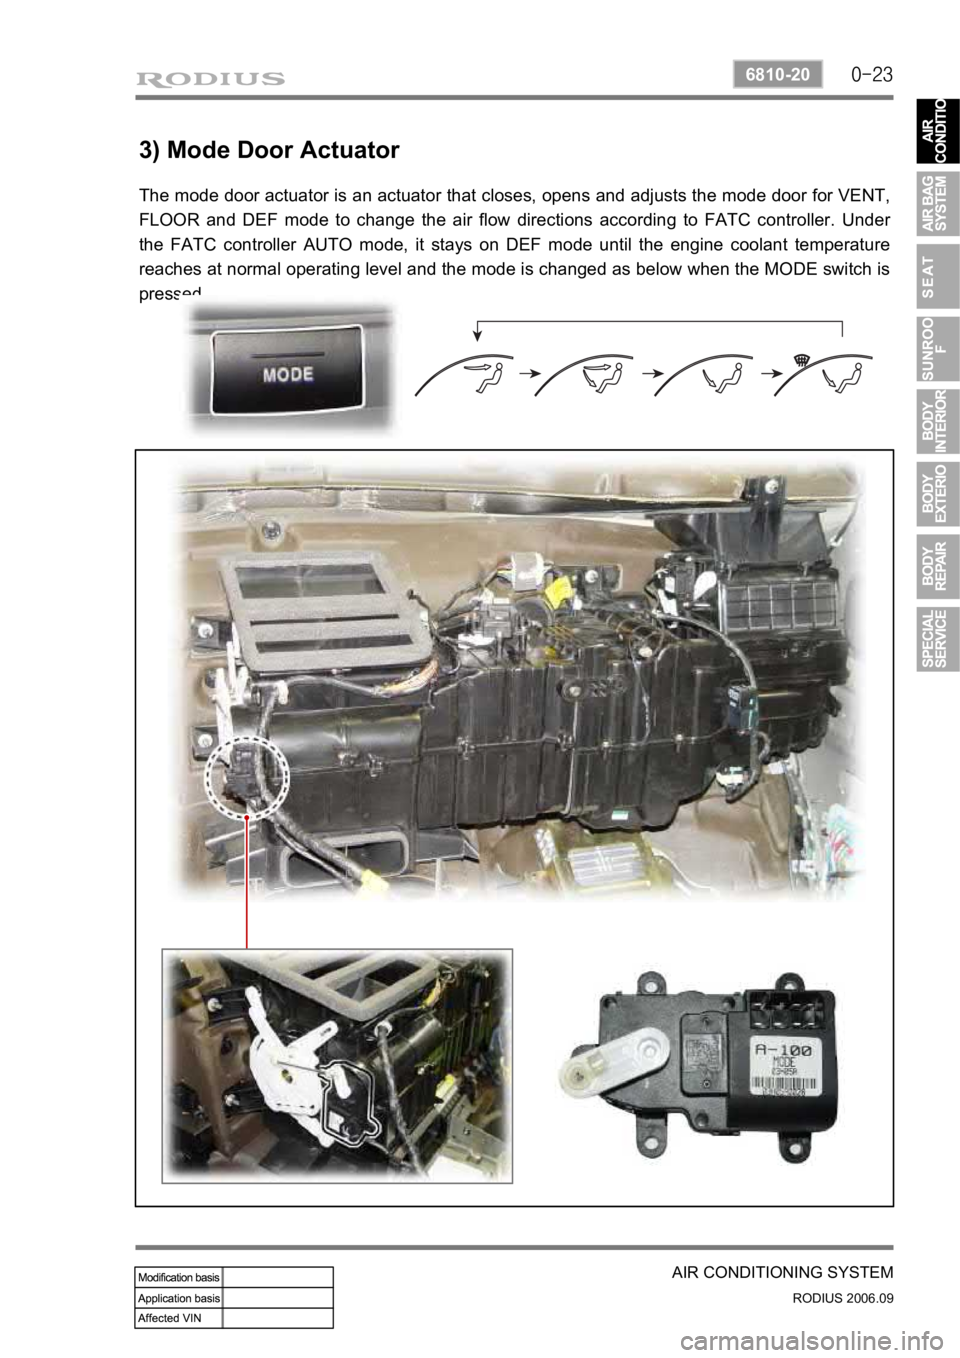 SSANGYONG RODIUS 2007  Service Manual 0-23
AIR CONDITIONING SYSTEM
RODIUS 2006.09
6810-20 
3) Mode Door Actuator
The mode door actuator is an actuator that closes, opens and adjusts the mode door for VENT,  
FLOOR and DEF mode to change t